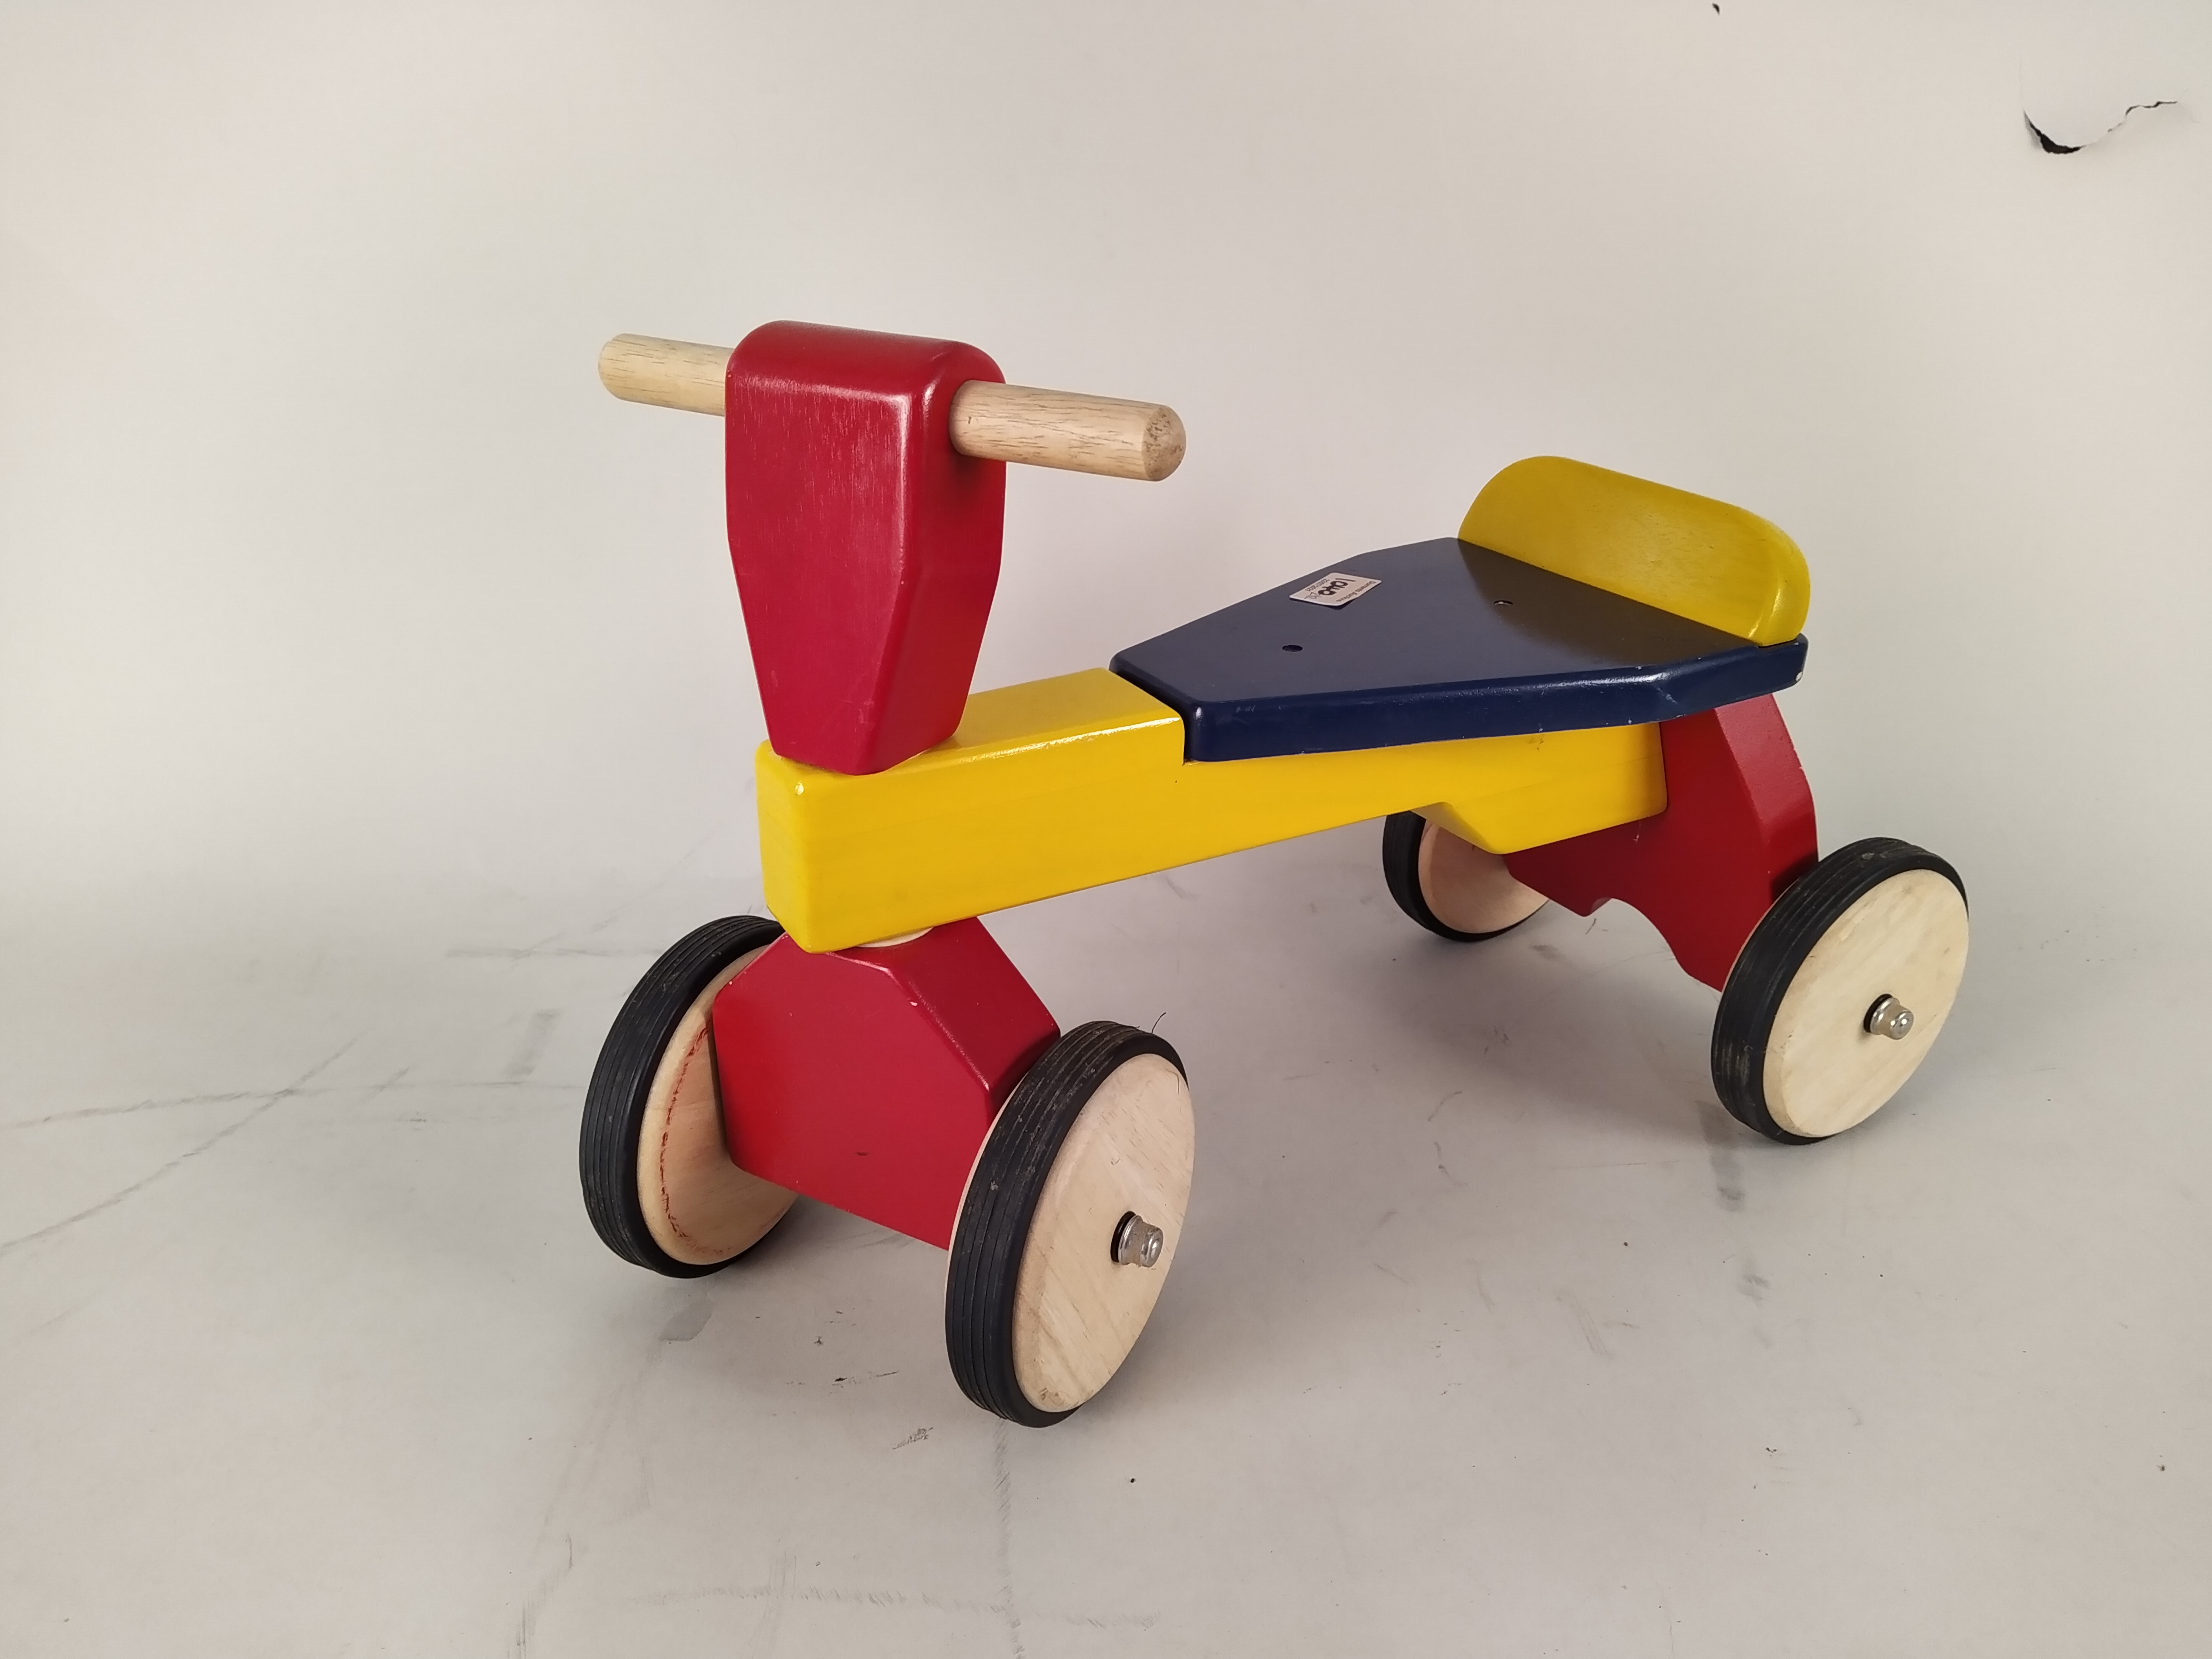 A wooden childs bike and a ride-a-long - Image 3 of 3